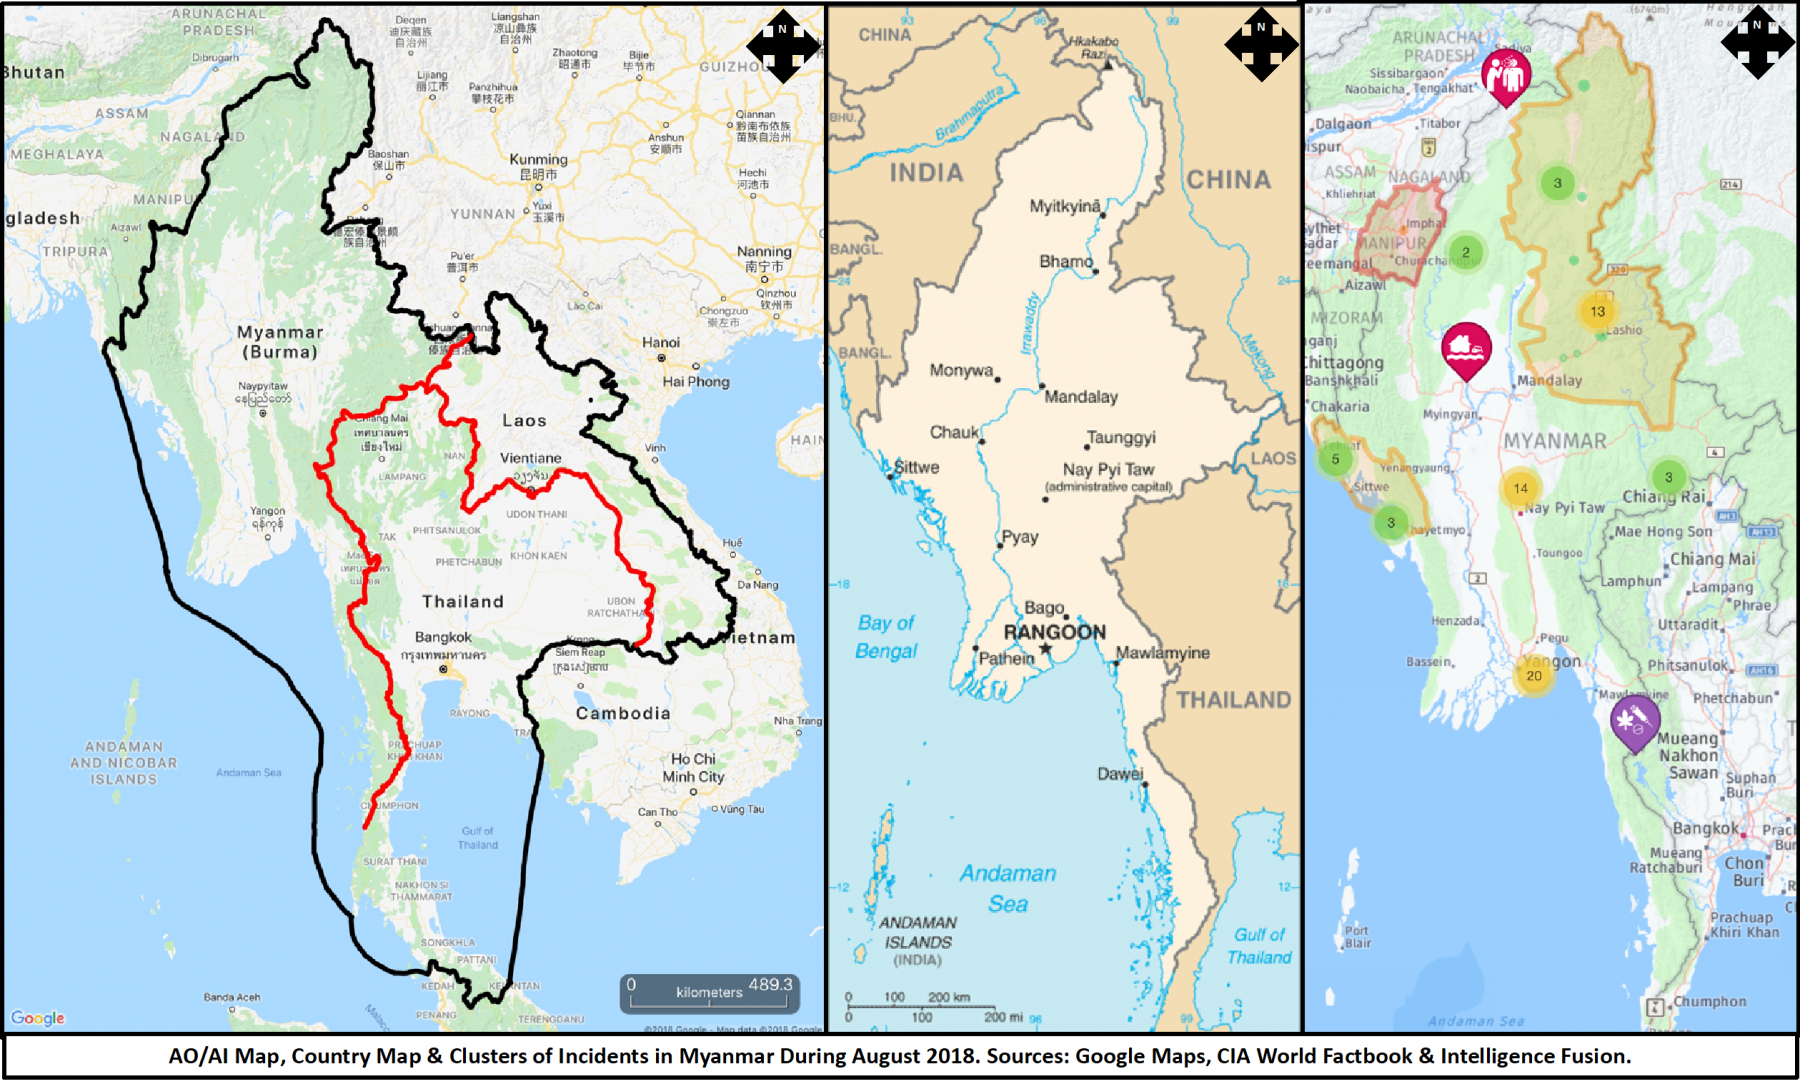 A map showing the most recent incidents in Myanmar during September 2018